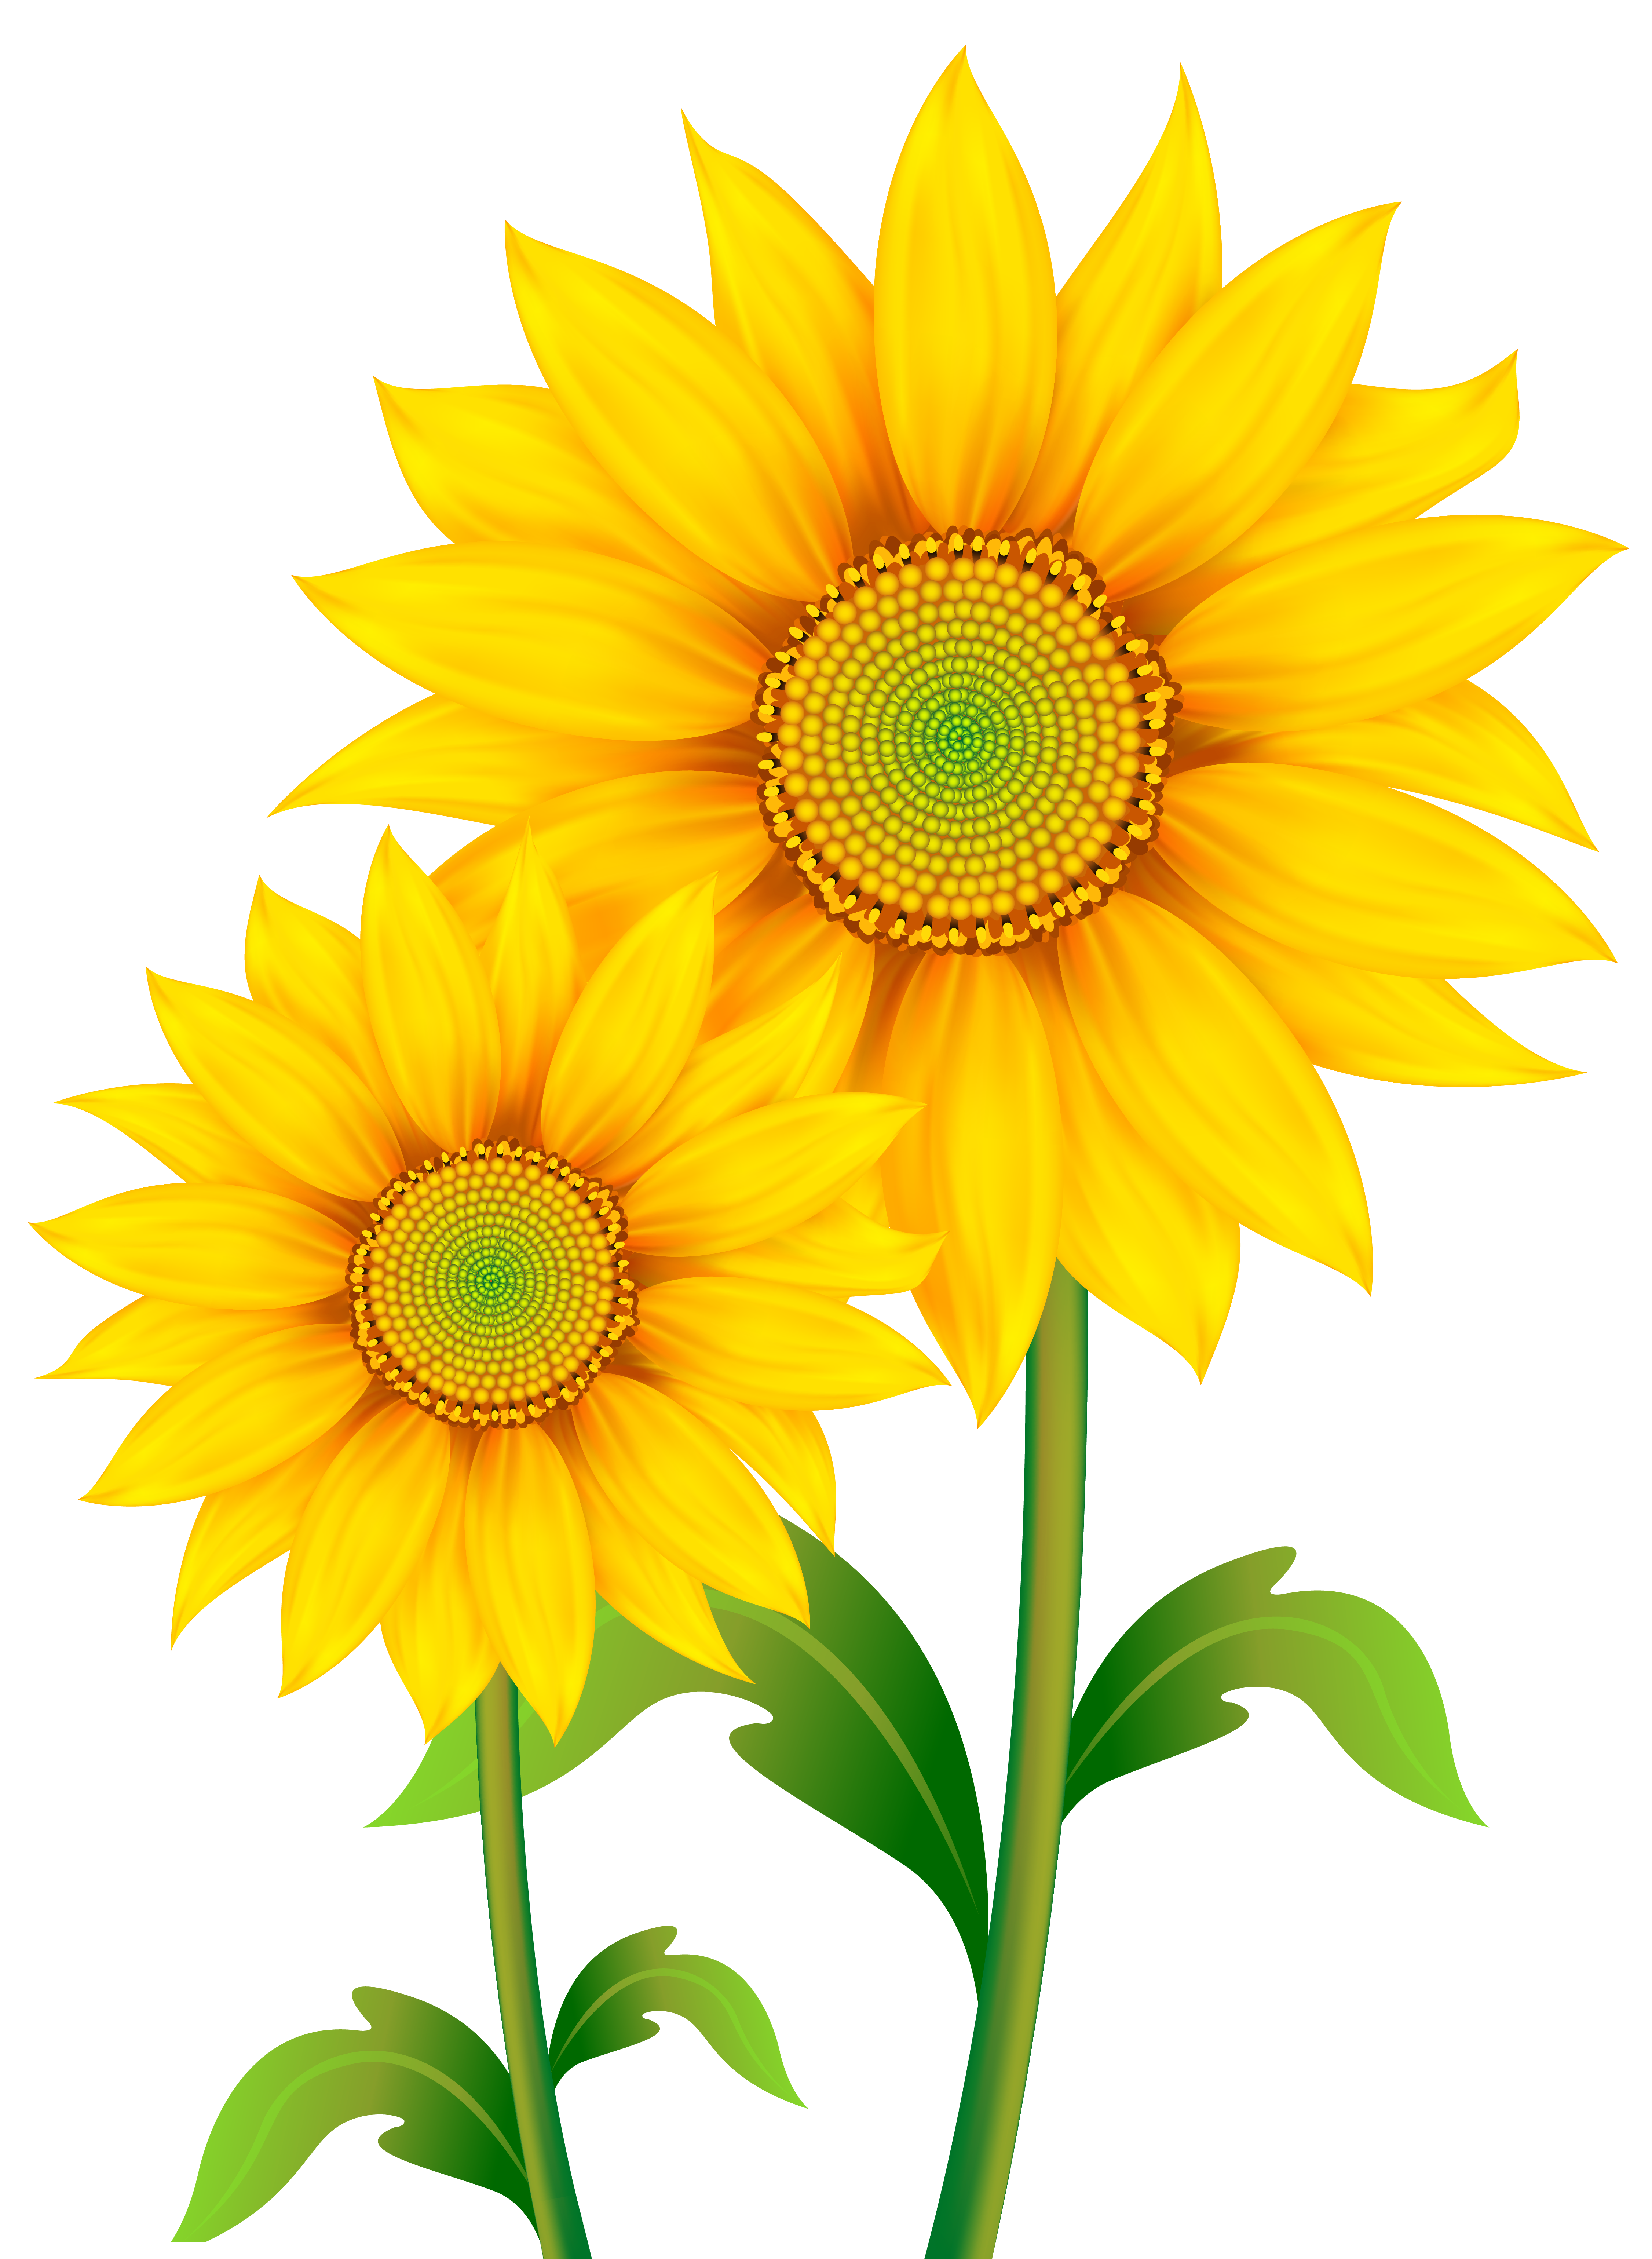 Transparent Sunflowers Clipart PNG Image | Gallery Yopriceville ...